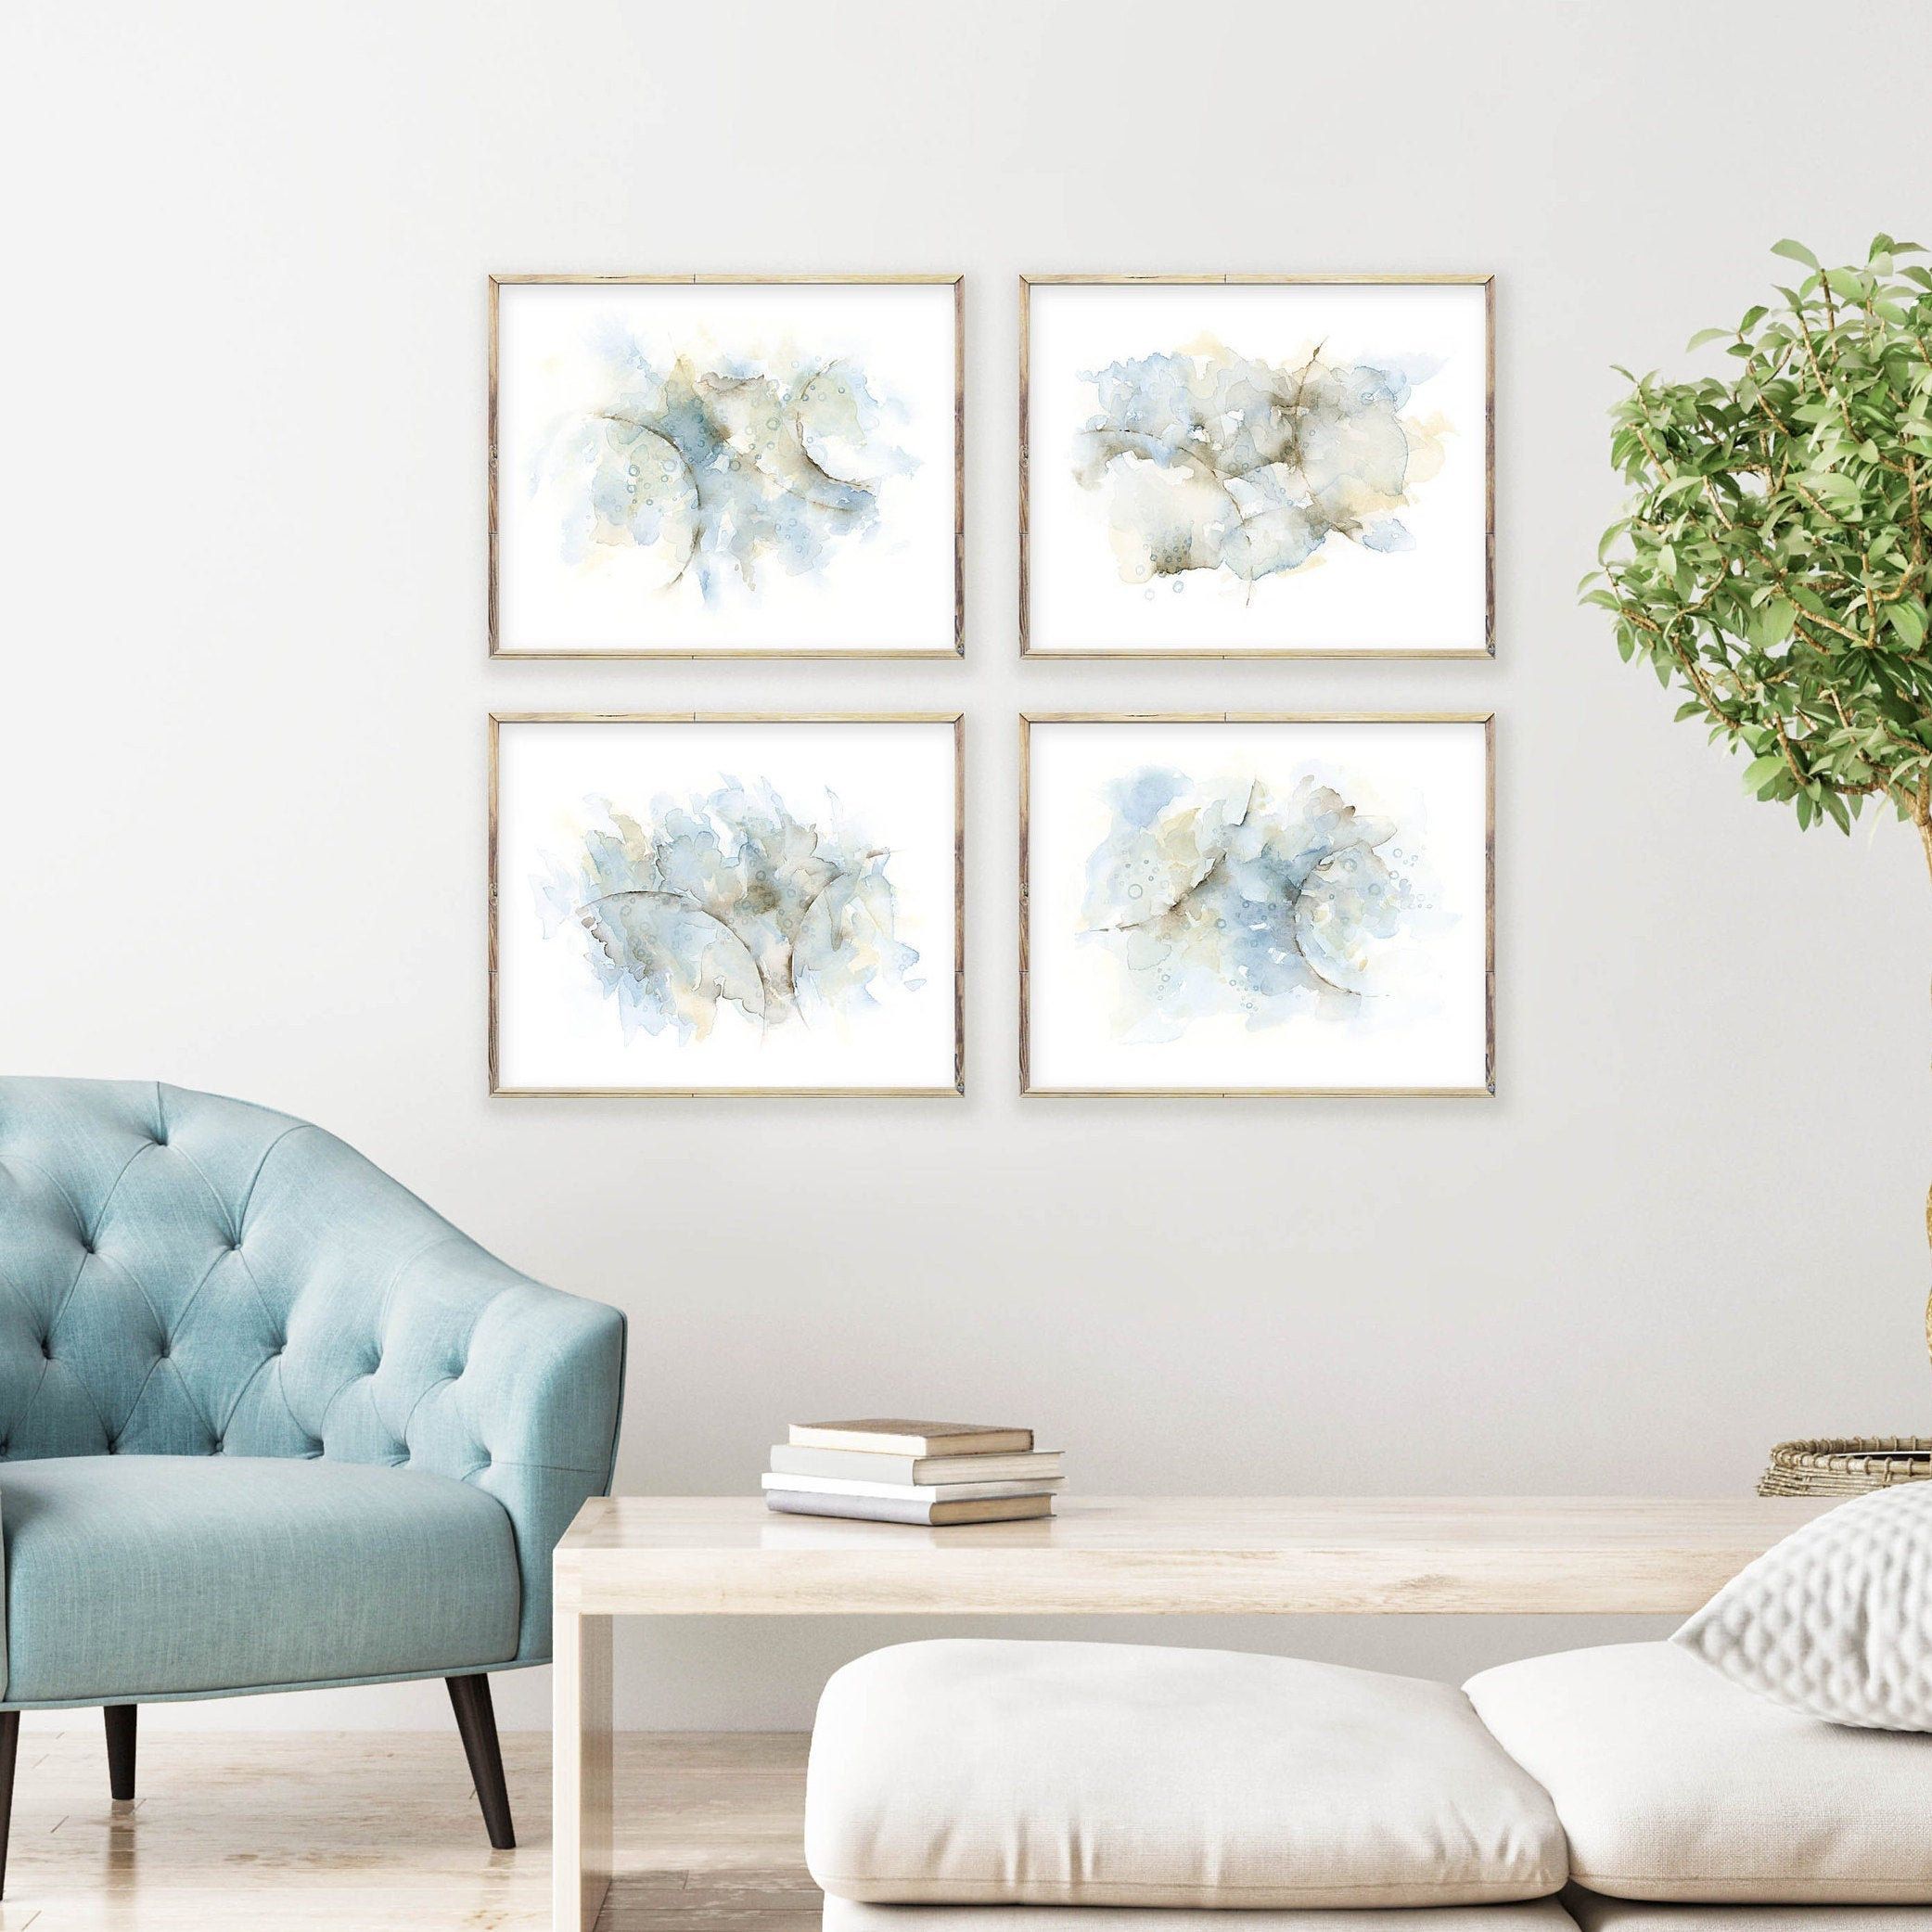 4 Piece Wall Art, Abstract Painting Watercolor Art Print Set Of Four, Grey  Blue Brown Living Room Wall Art, Bedroom Wall Decor Over The Bed Regarding 4 Piece Wall Decor Sets (View 30 of 30)